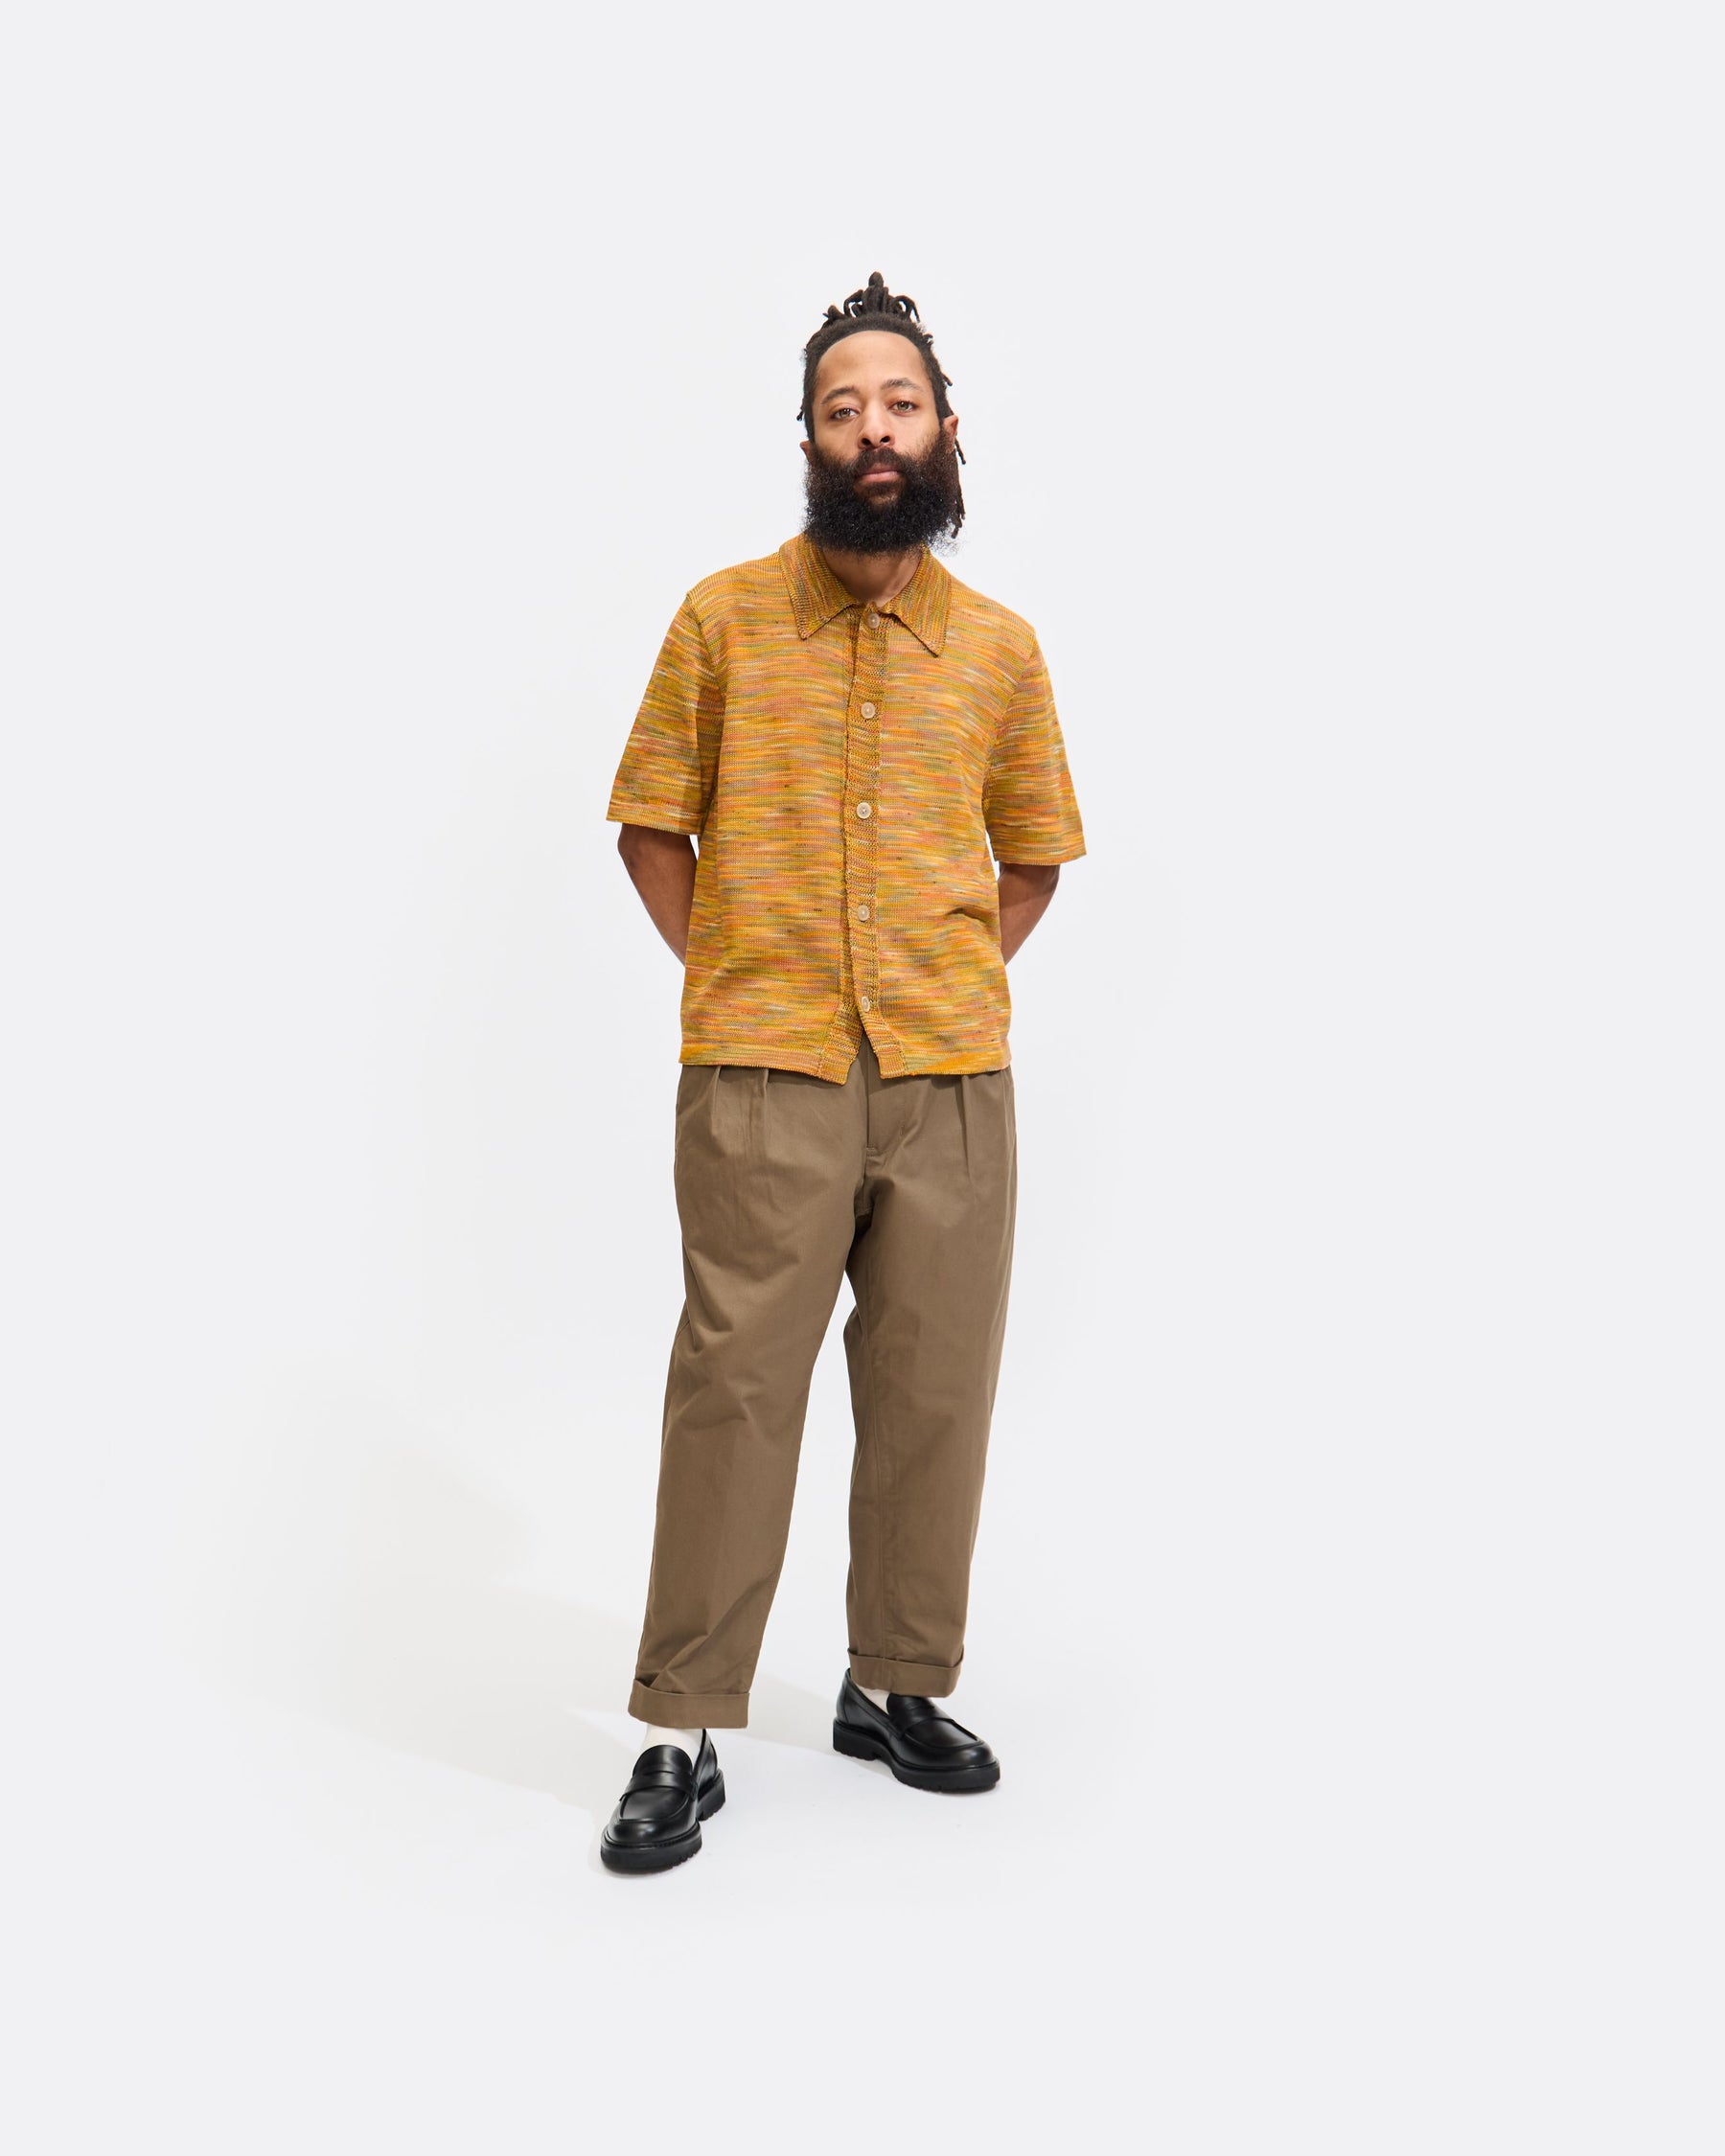 Hand-Dyed SS Buttondown in Yellow